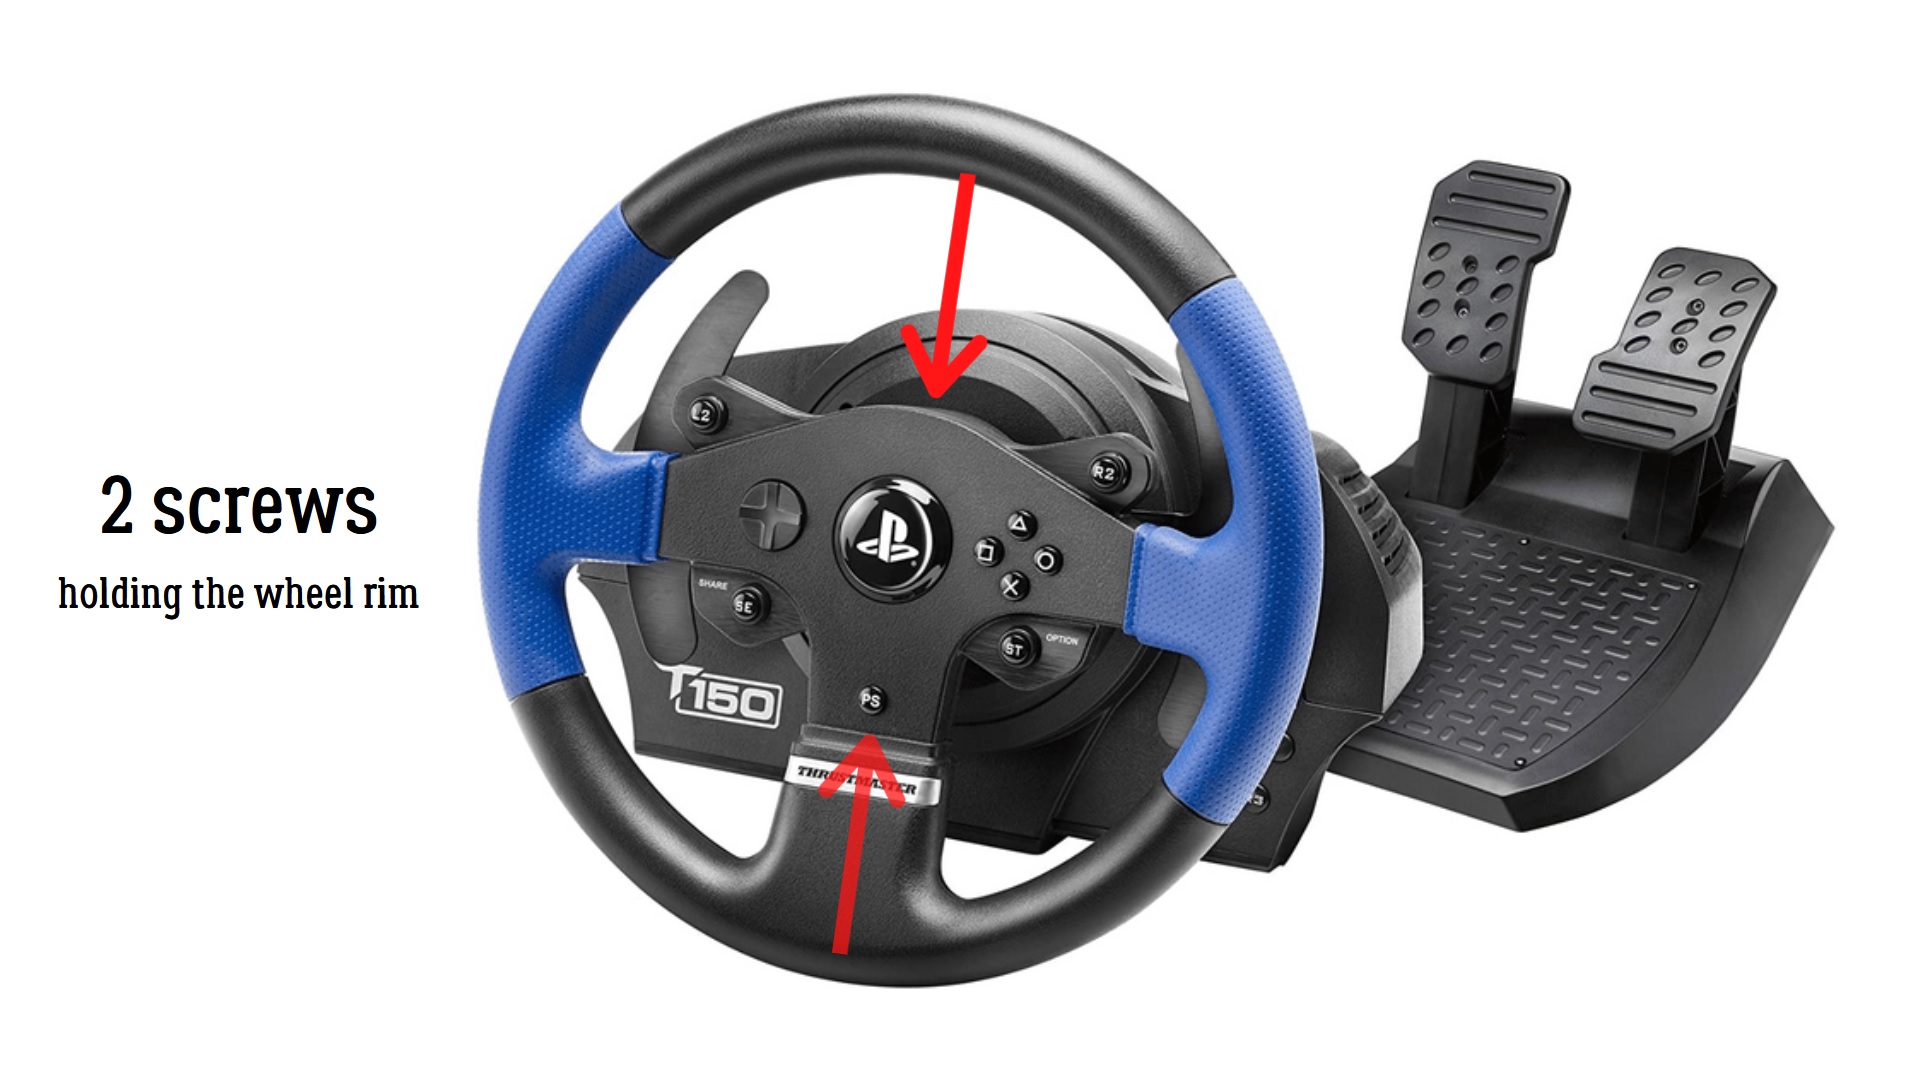 CarX Drift Racing Online How to Upgrade Thrustmaster T150, TMX and T300 Thrustmaster Wheels Guide - Wheel base disassembly - B86C0F5